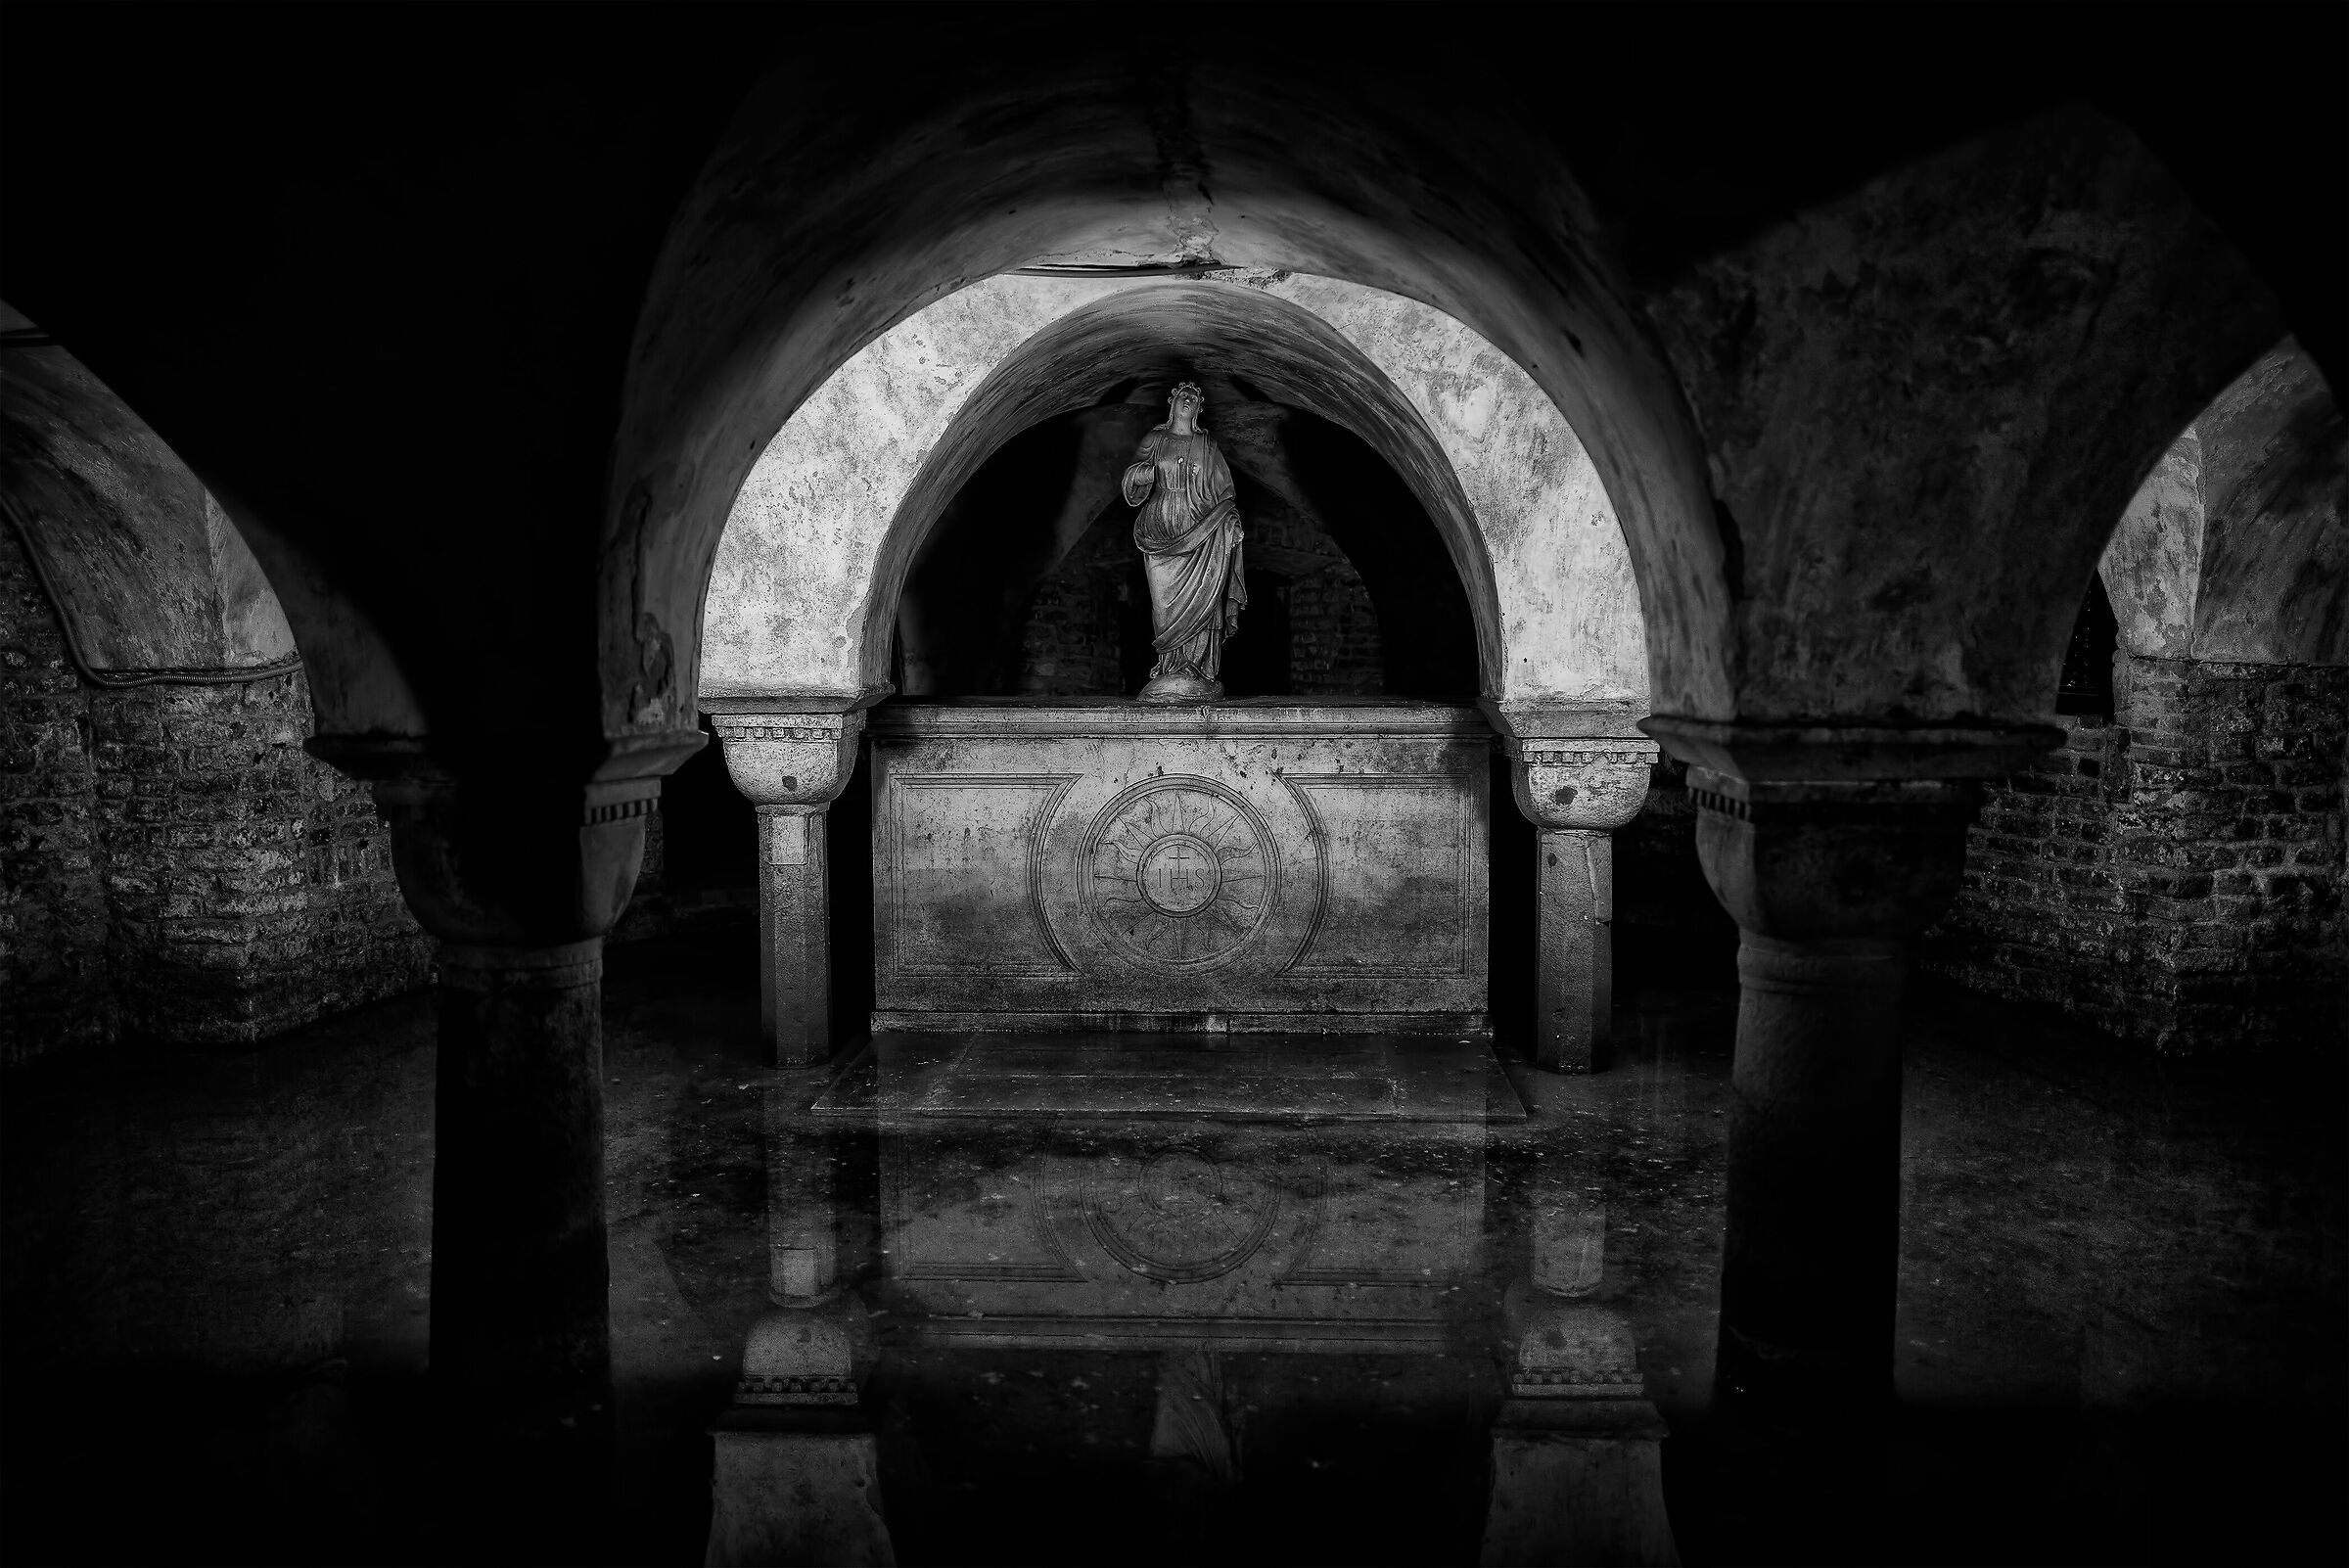 In the Crypt...